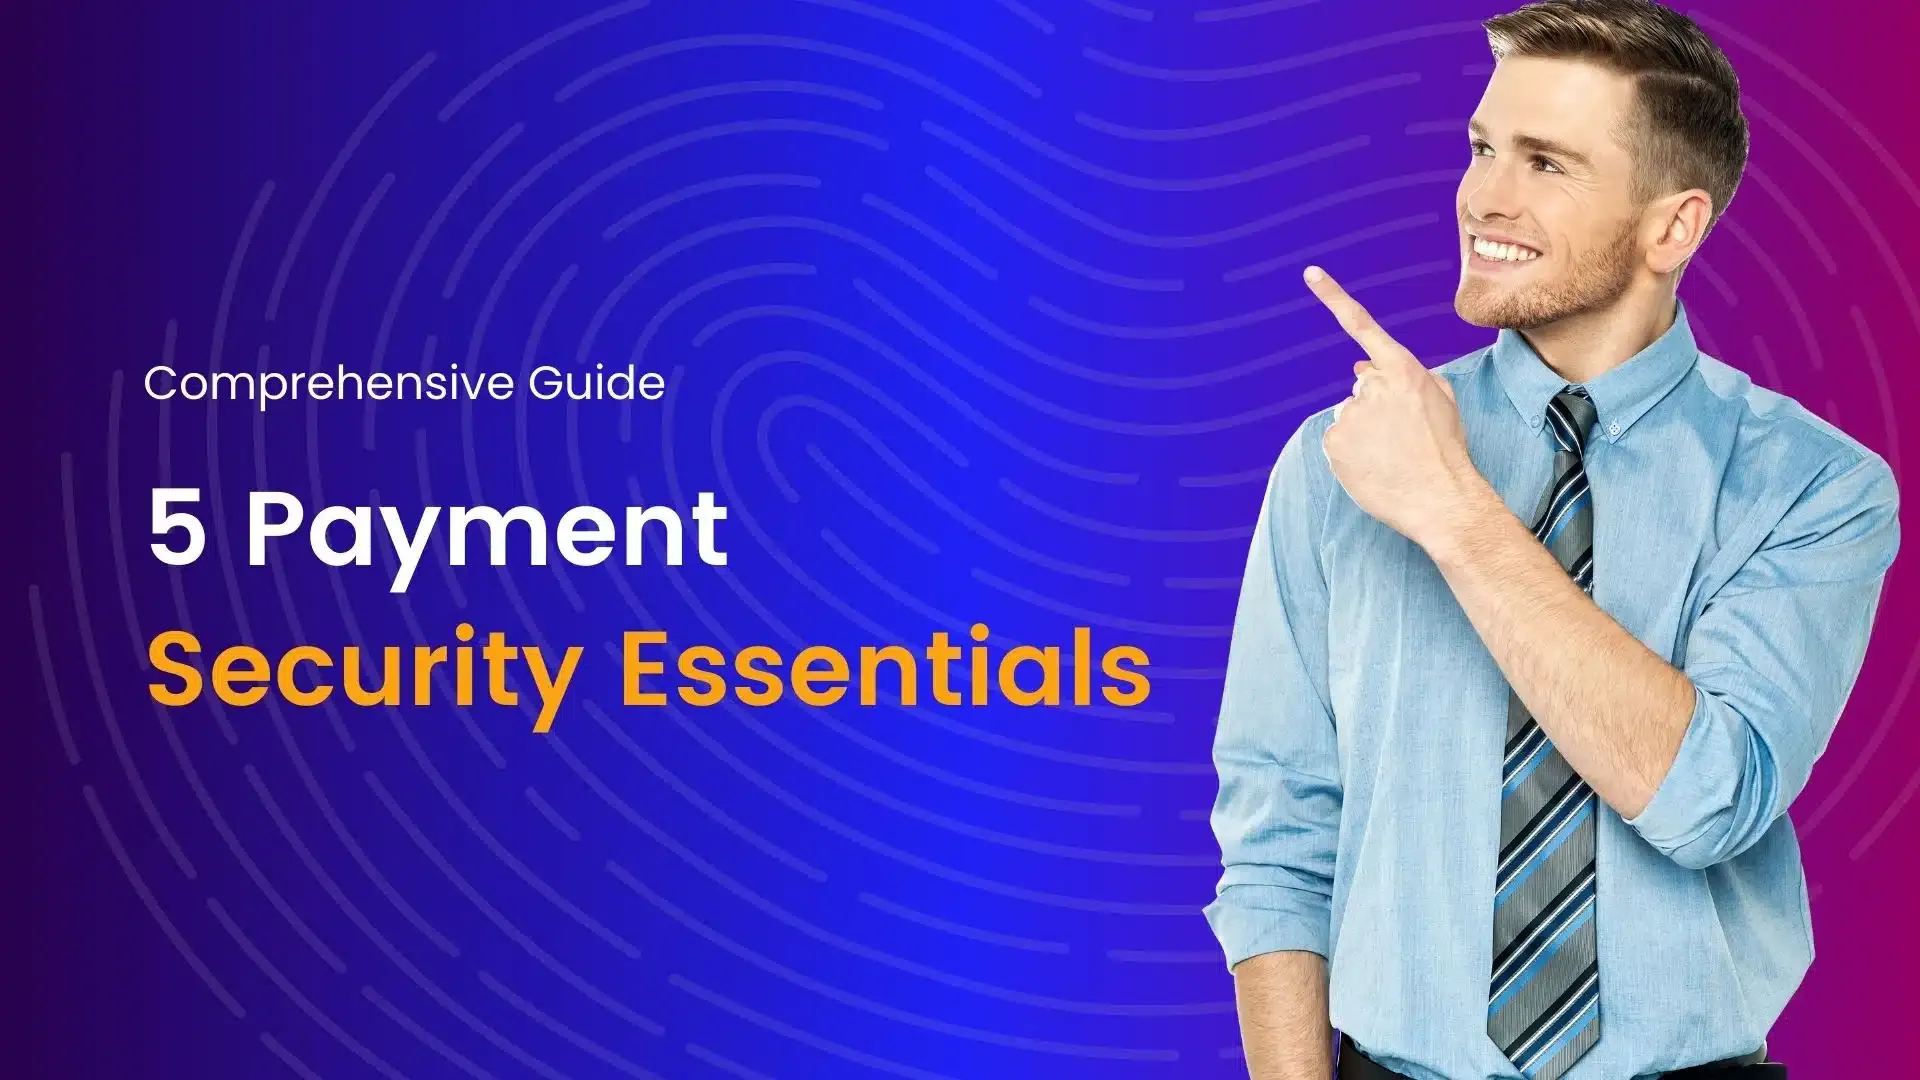 5 Payment Security Essentials